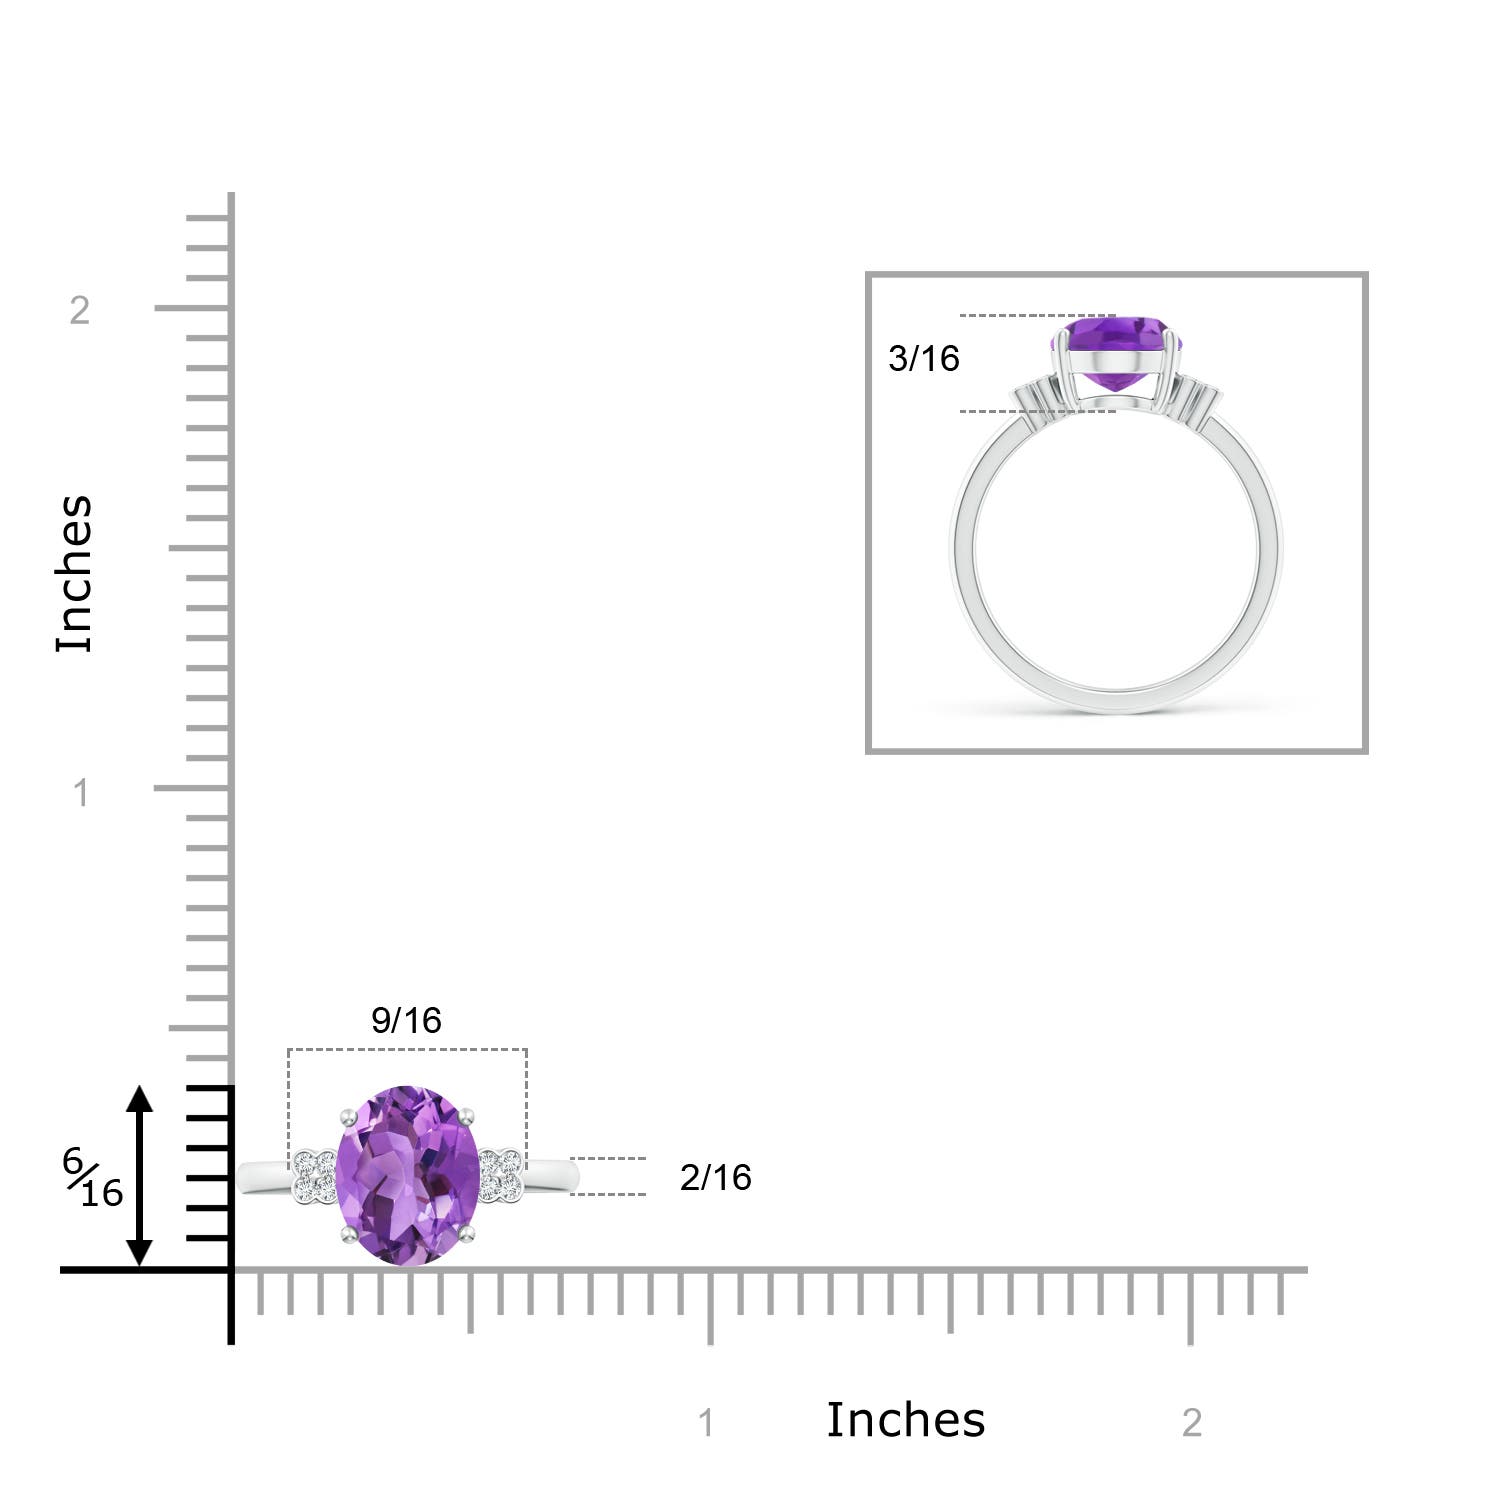 AA- Amethyst / 2.36 CT / 14 KT White Gold